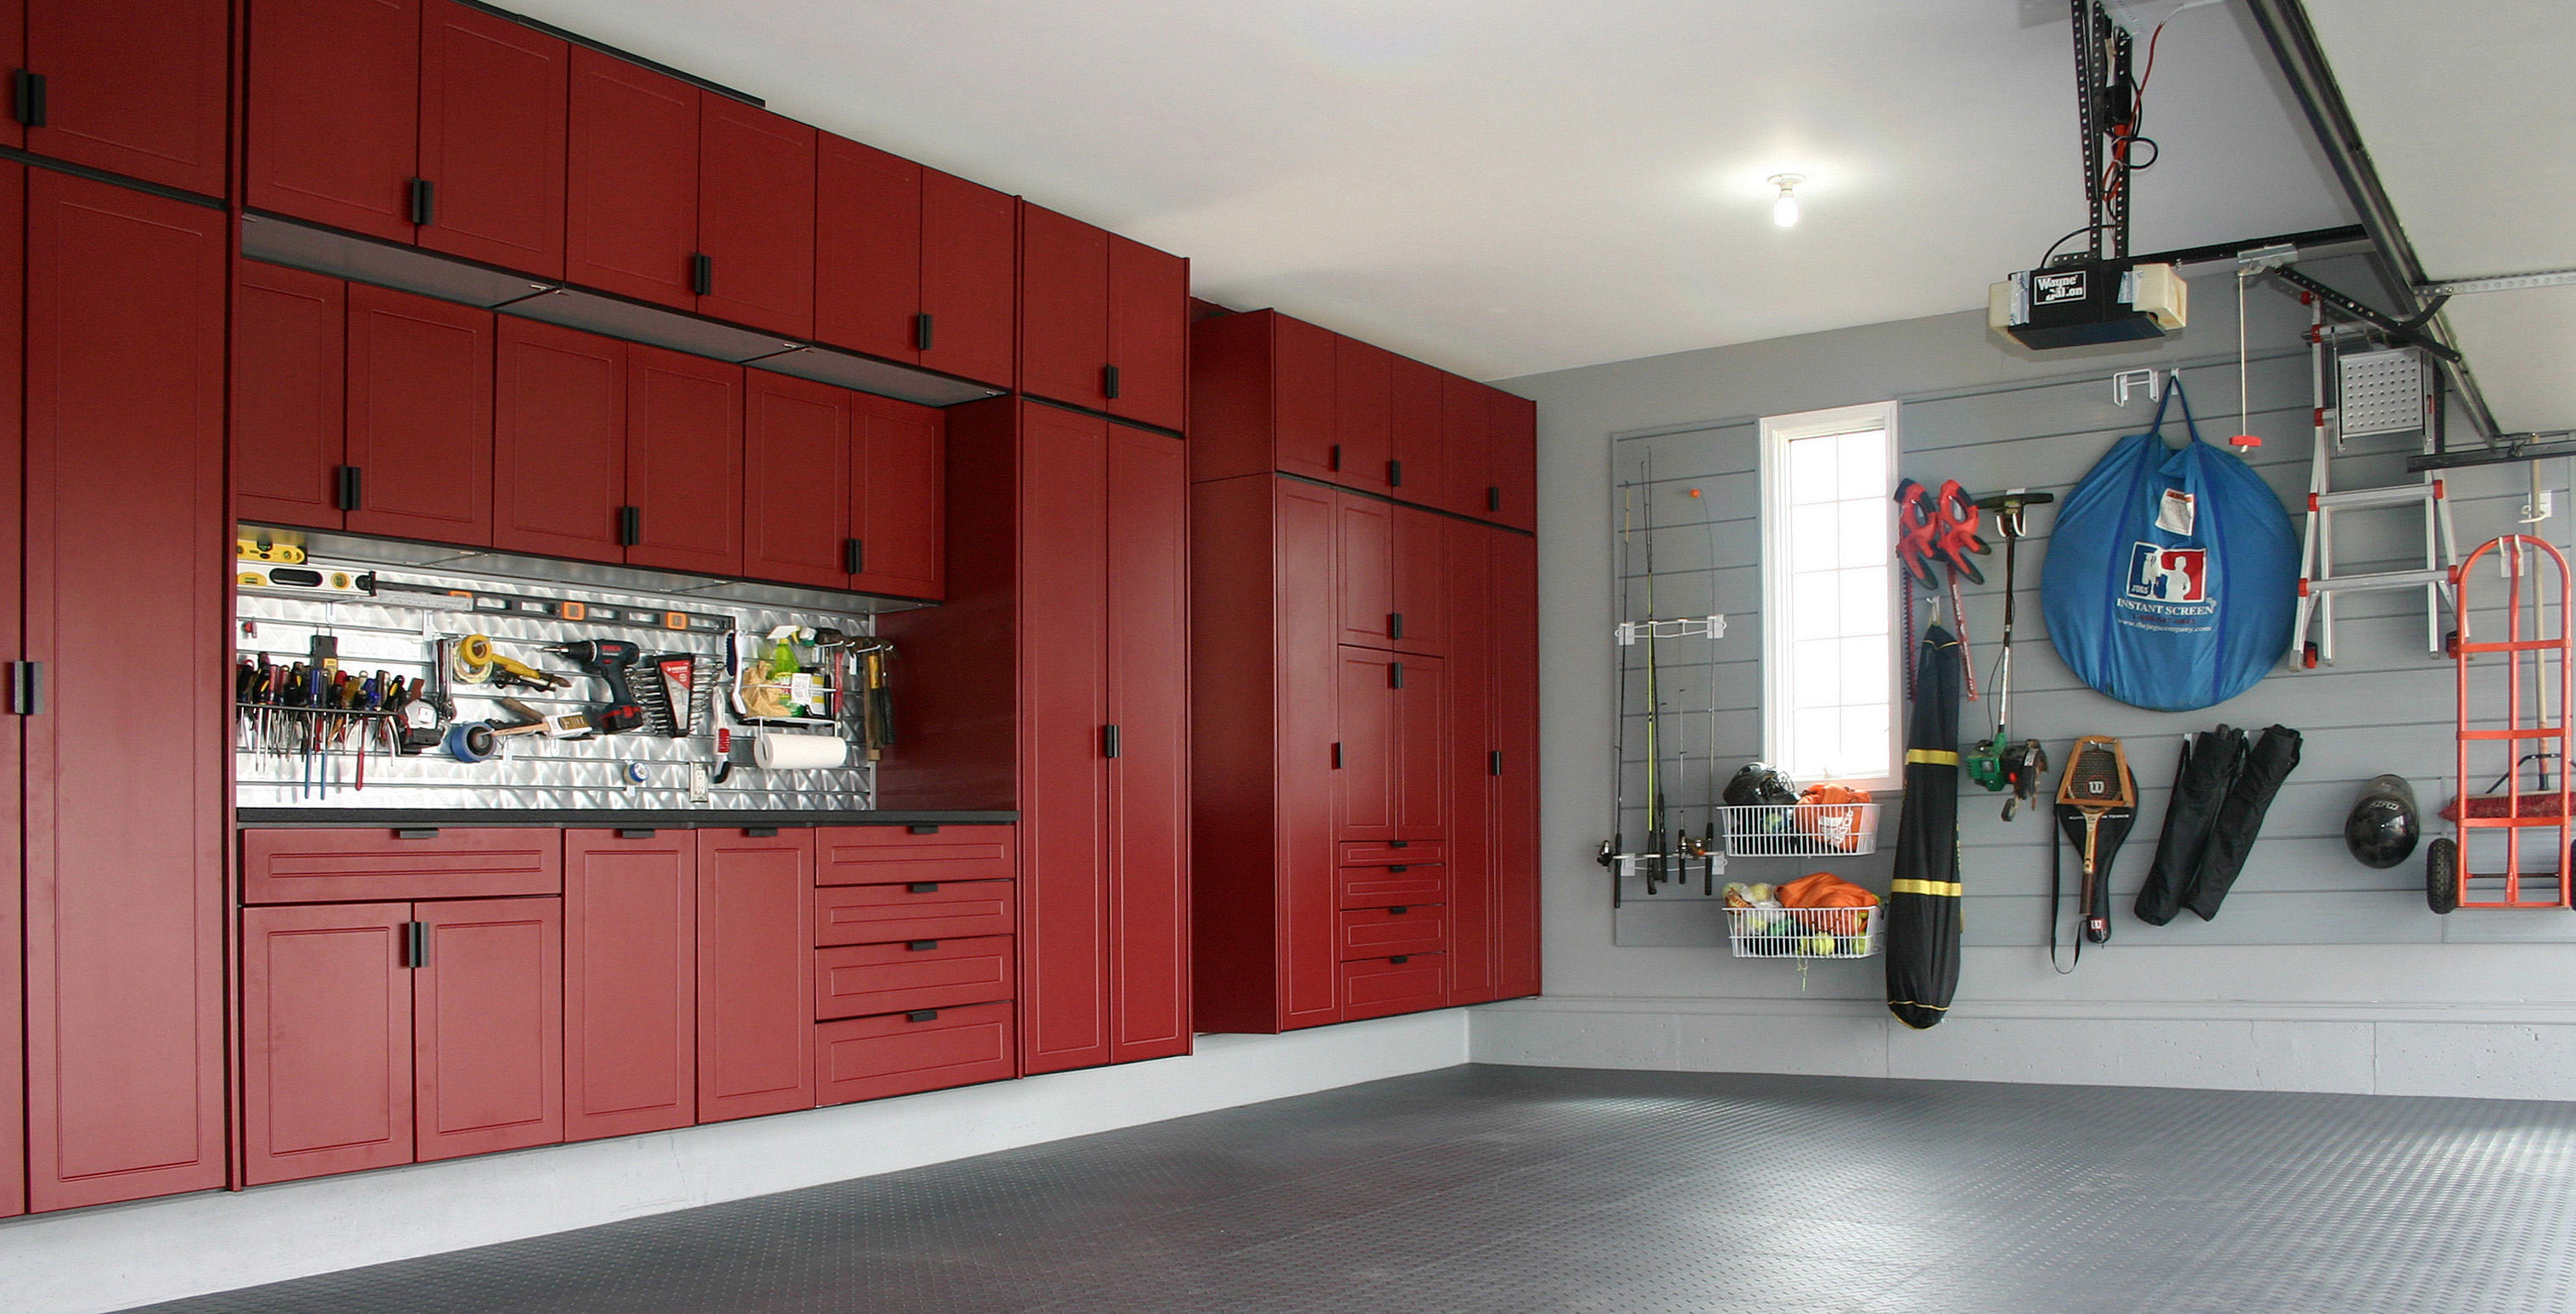 Custom Garage Cabinets in Red Custom Cabinets Houston - Cabinet Masters